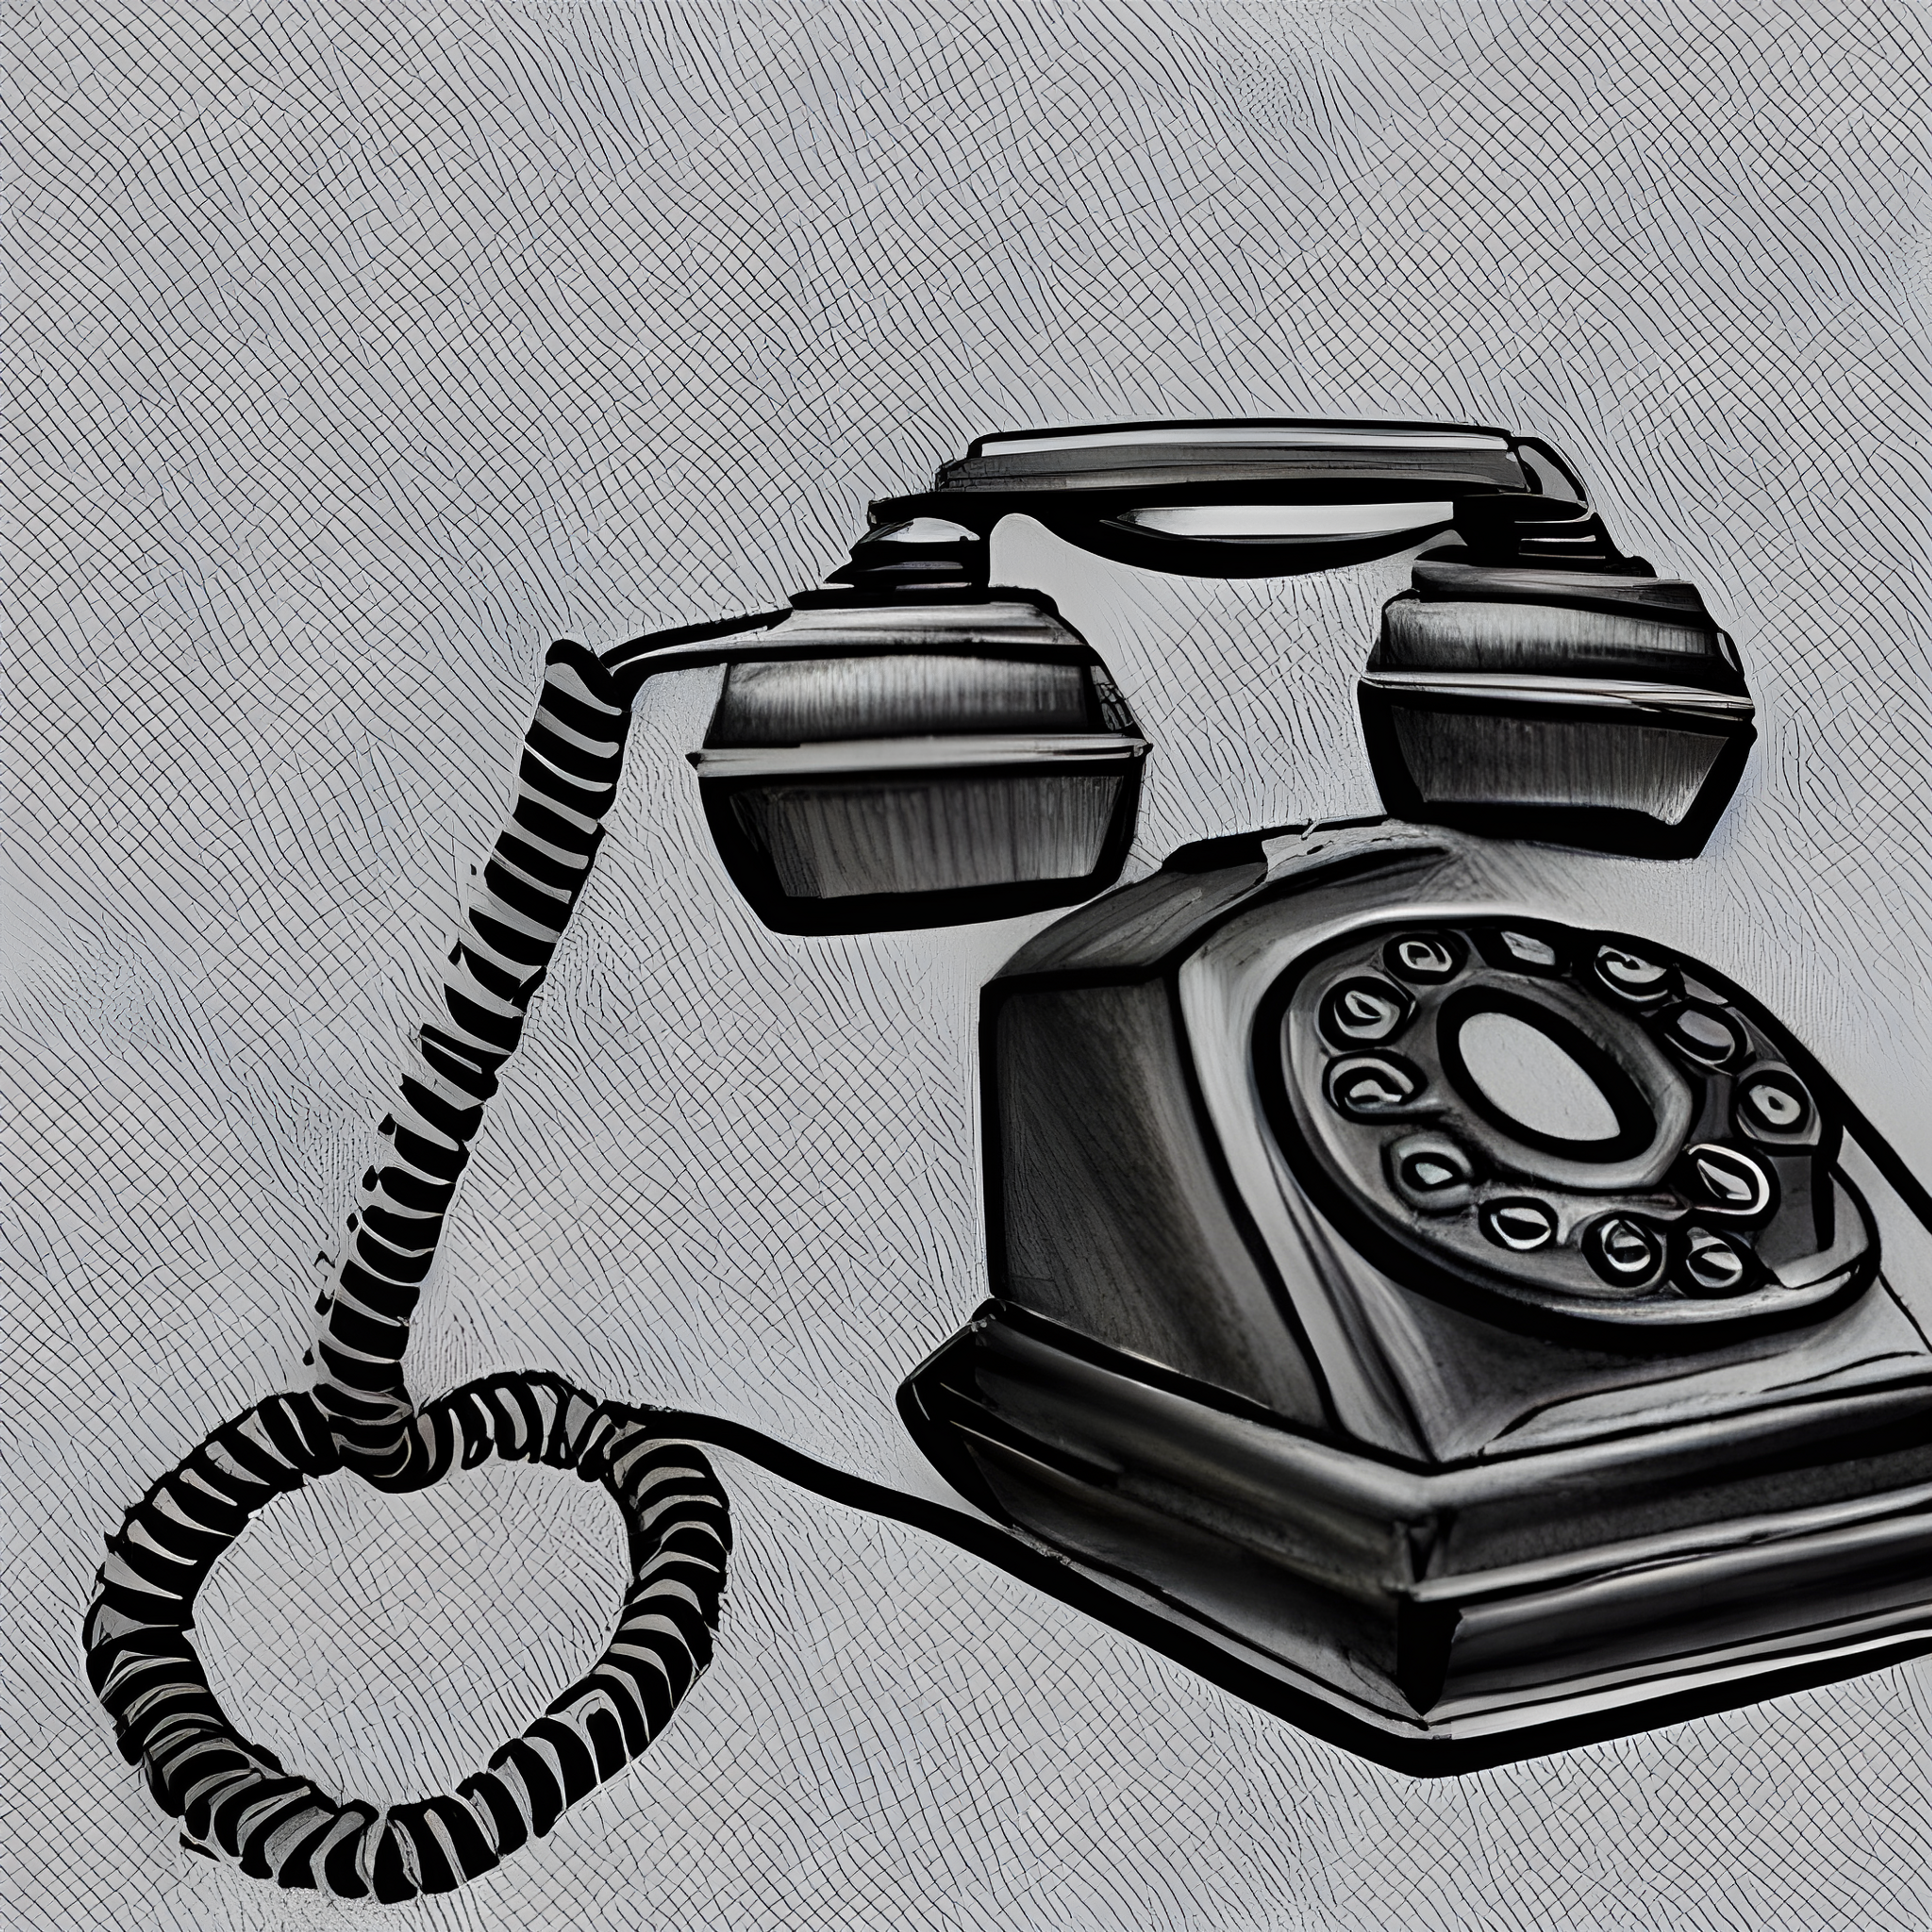 An illustration of a retro rotary telephone